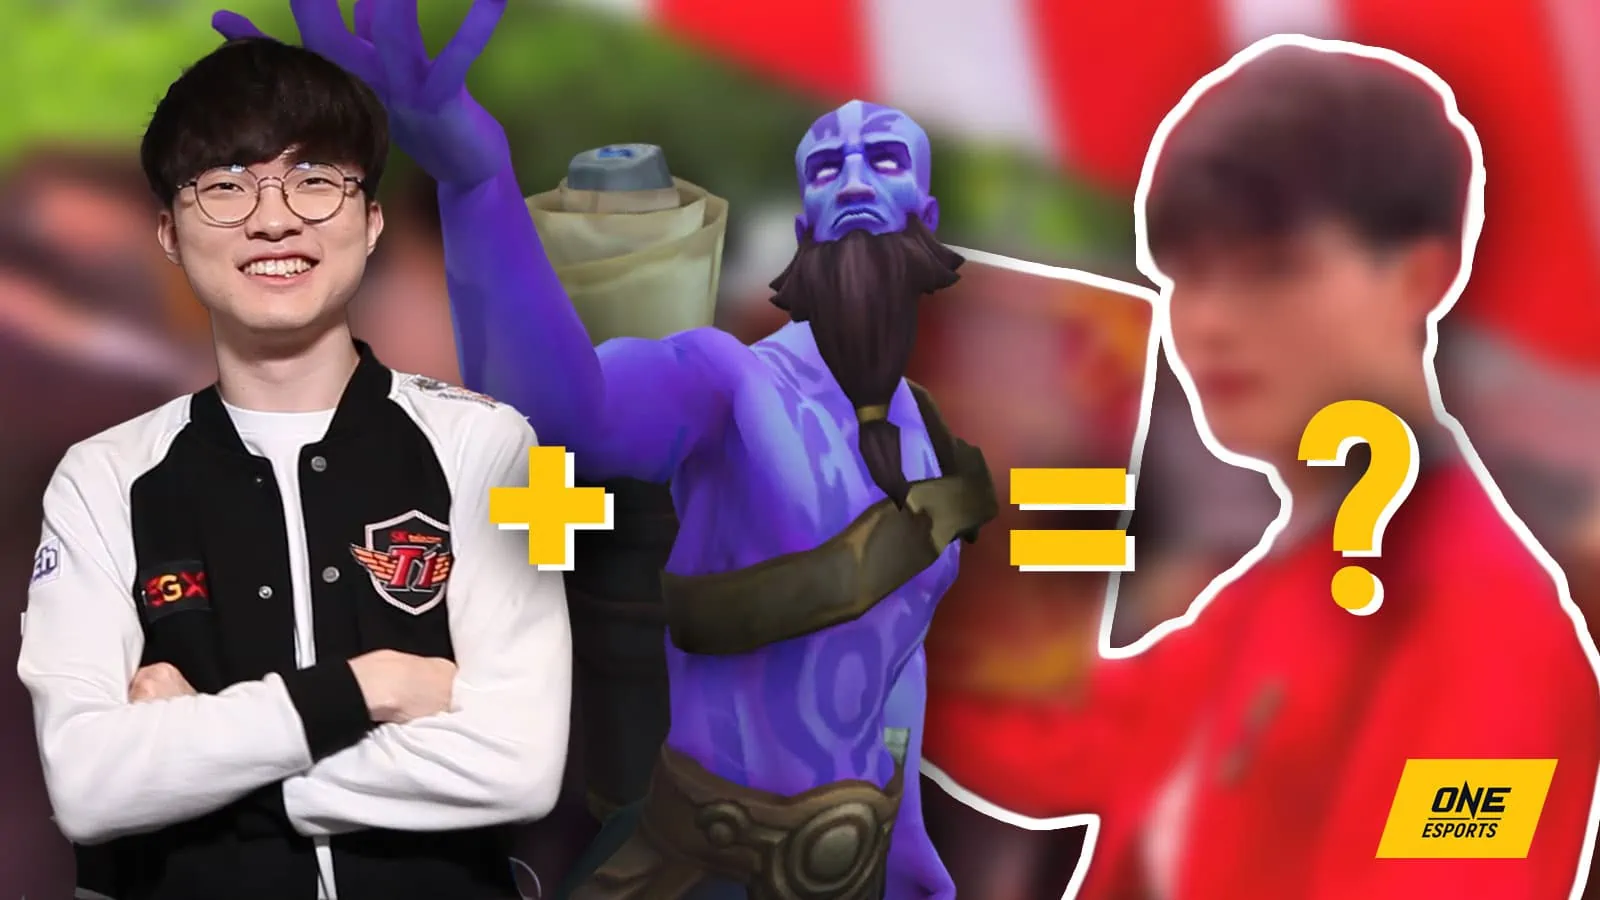 Can you cosplay a real person? Fan does Faker cosplay of Faker cosplaying Ryze - ONE Esports (Picture 1)